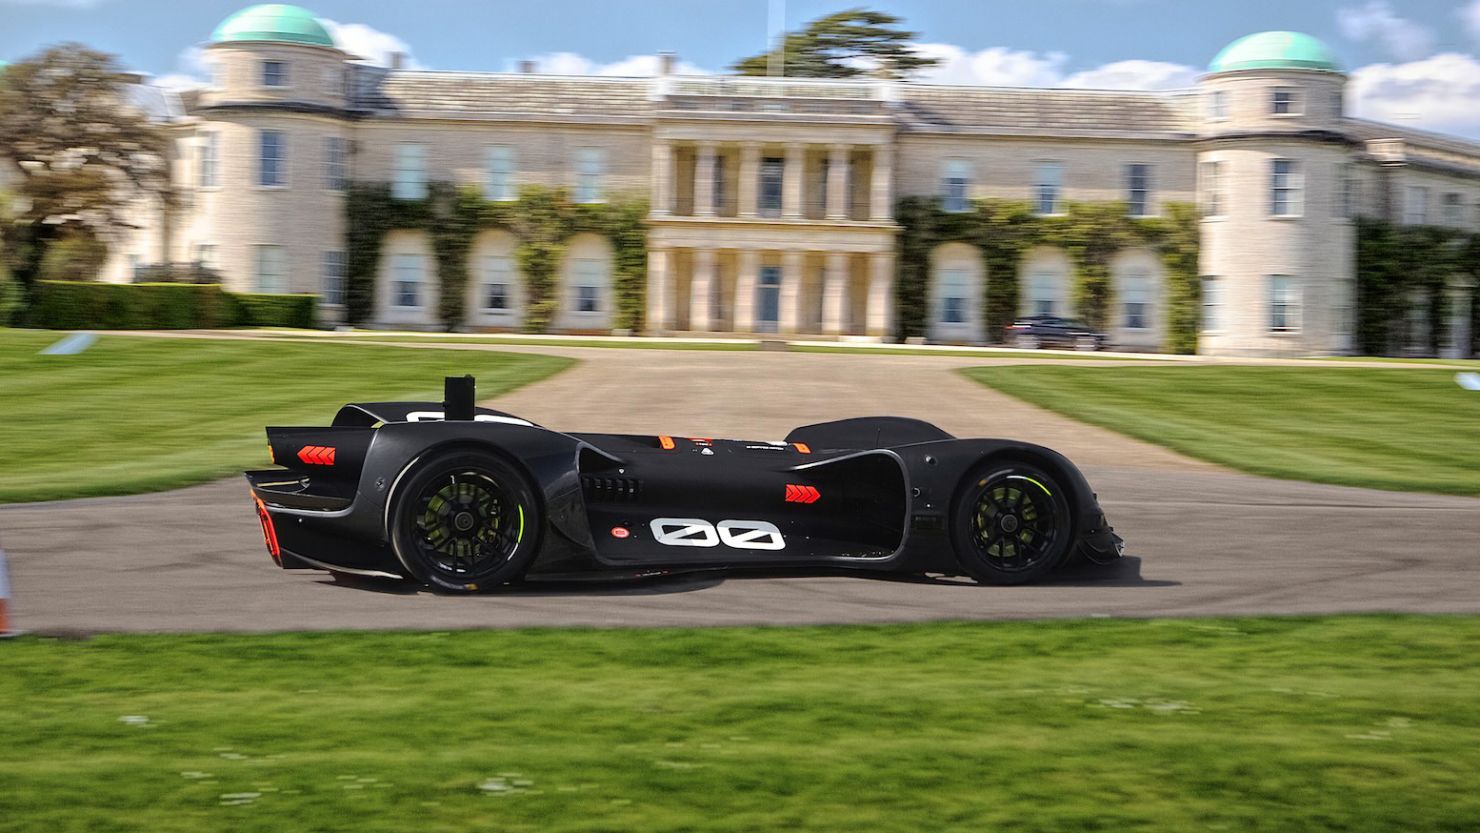 A Robocar will compete in the Goodwood Festival of Speed's famous hill climb event.